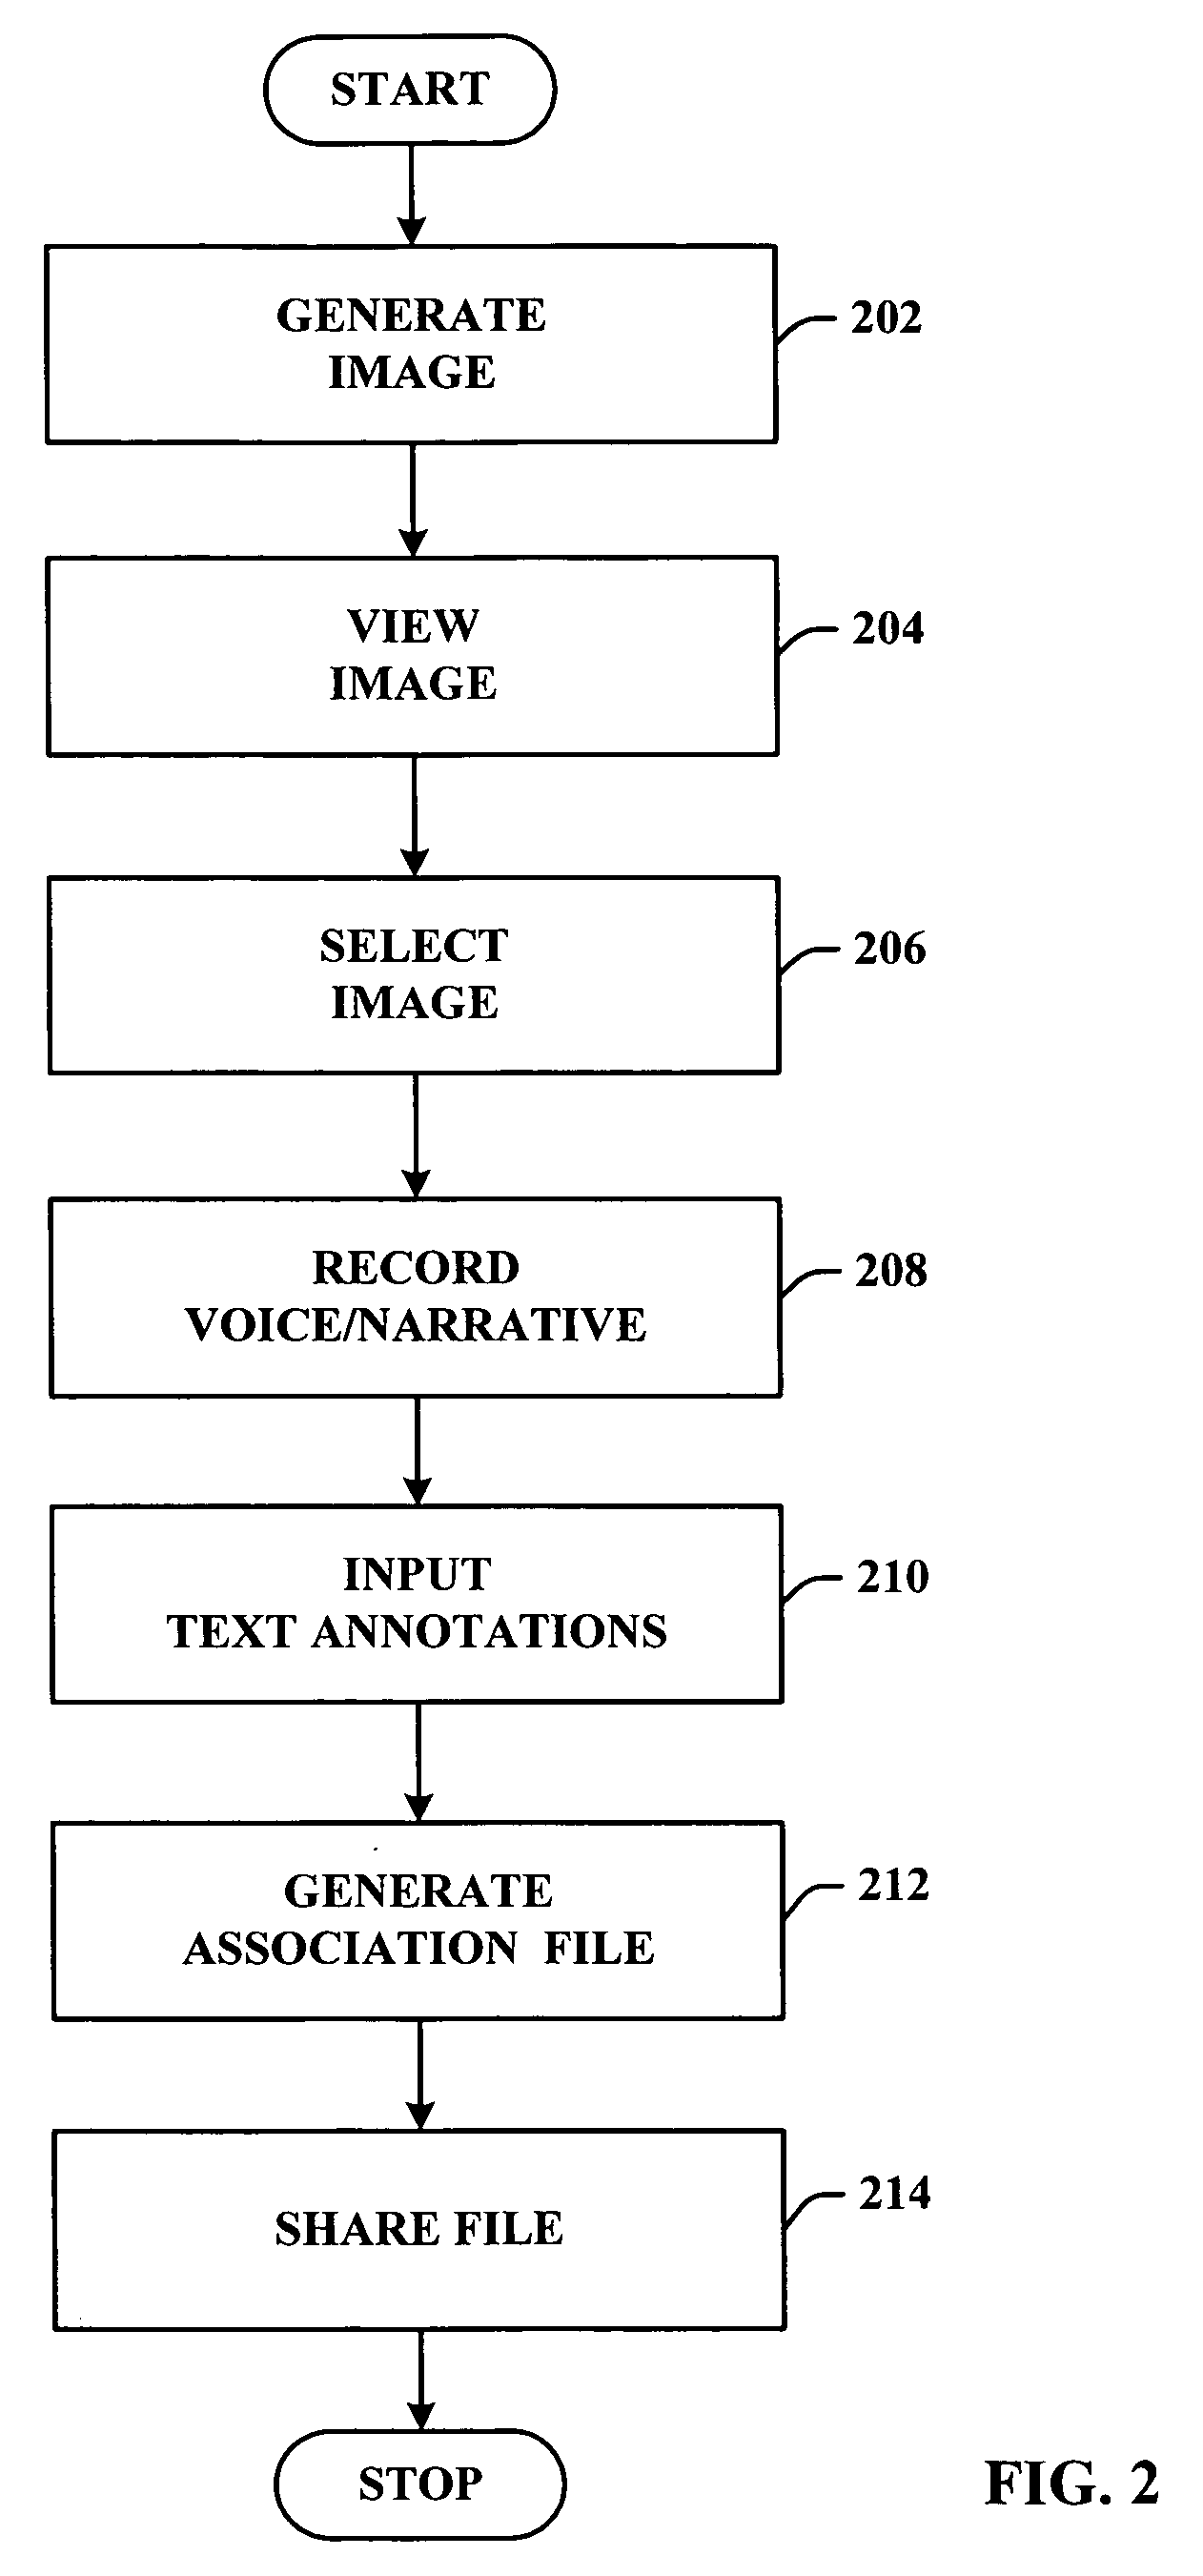 System and method to associate content types in a portable communication device